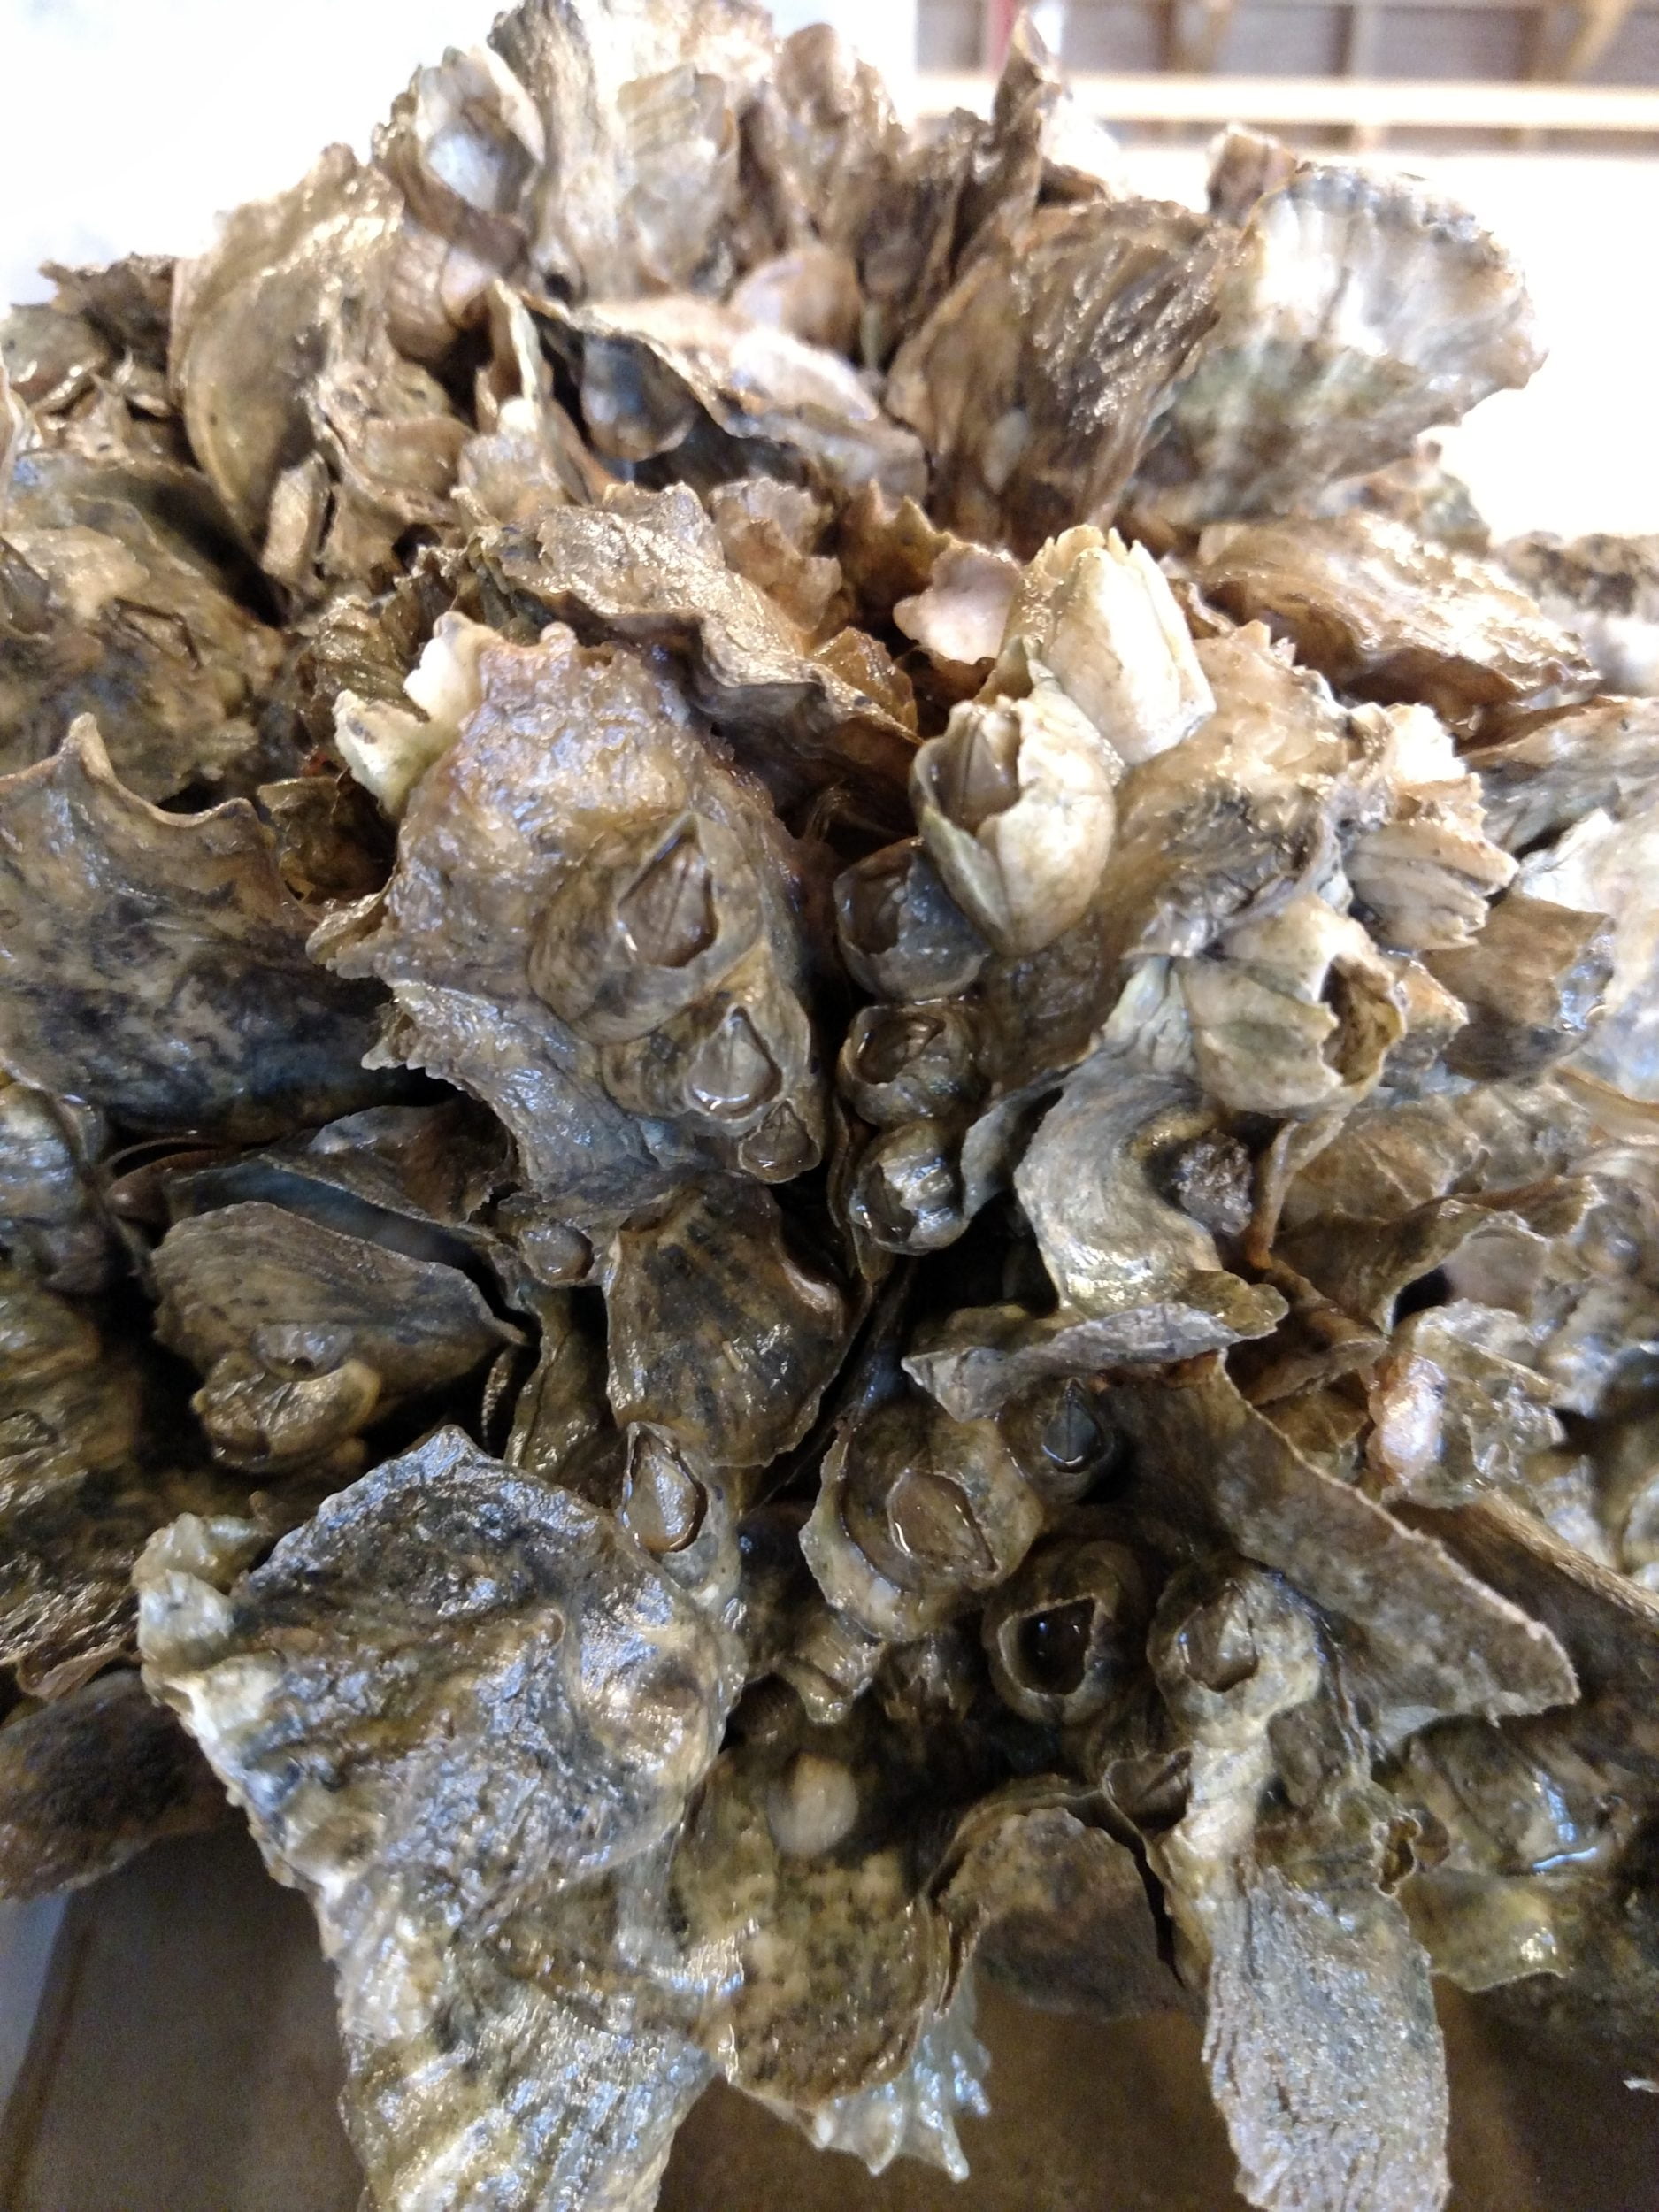 Oyster clump